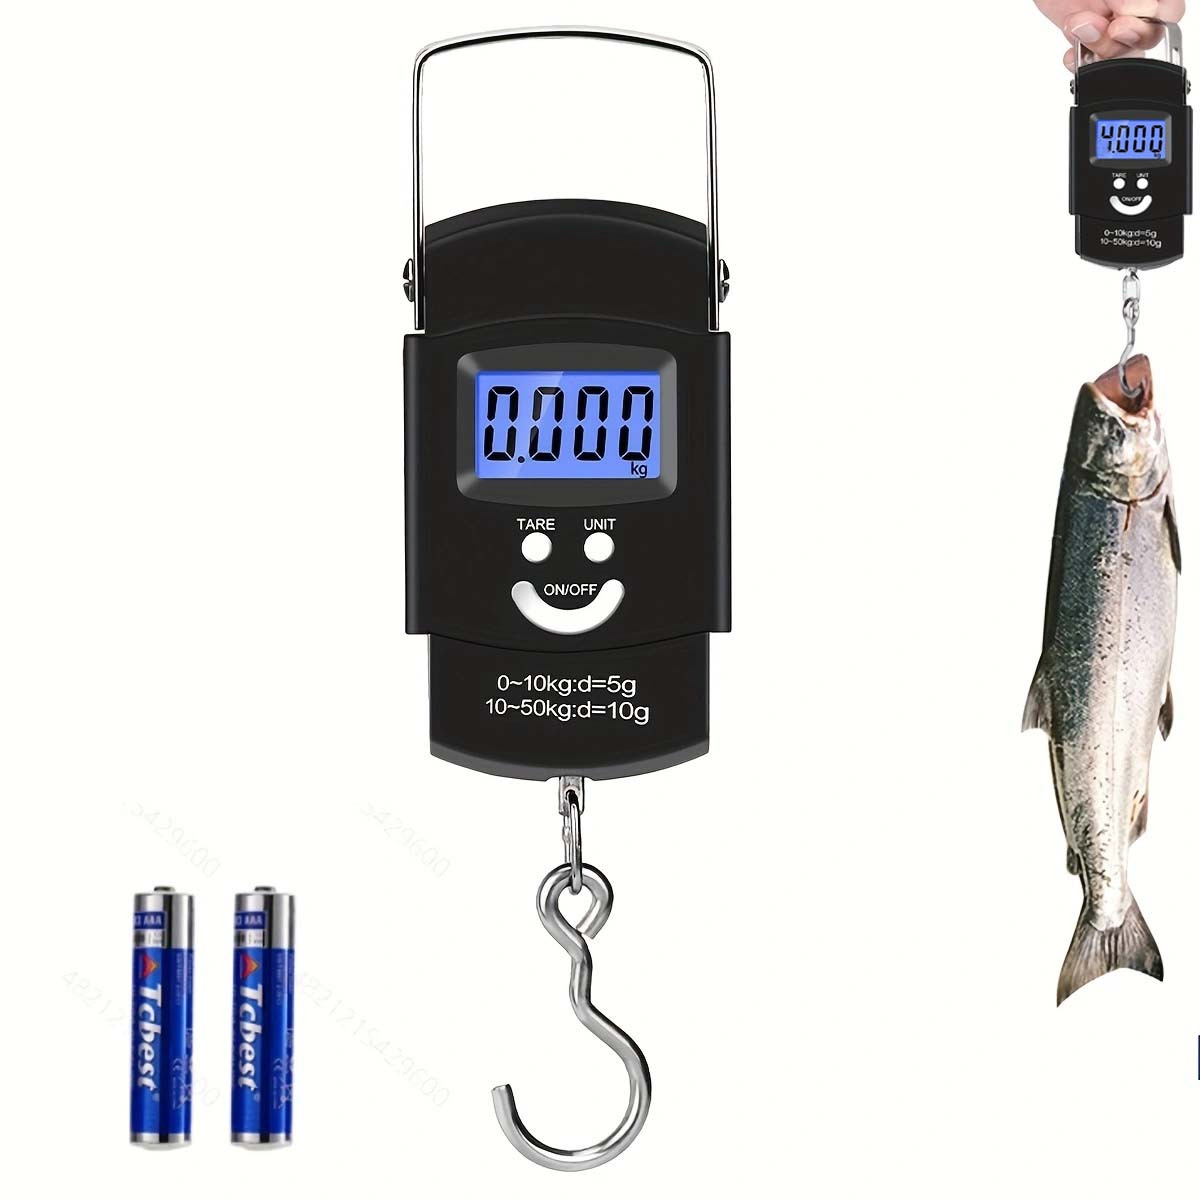 Portable Fishing Scale, Digital Hanging Hook Scale with Backlit LCD  Display, Electronic Travel Scale for Luggage, 110lb./ 50 kg 